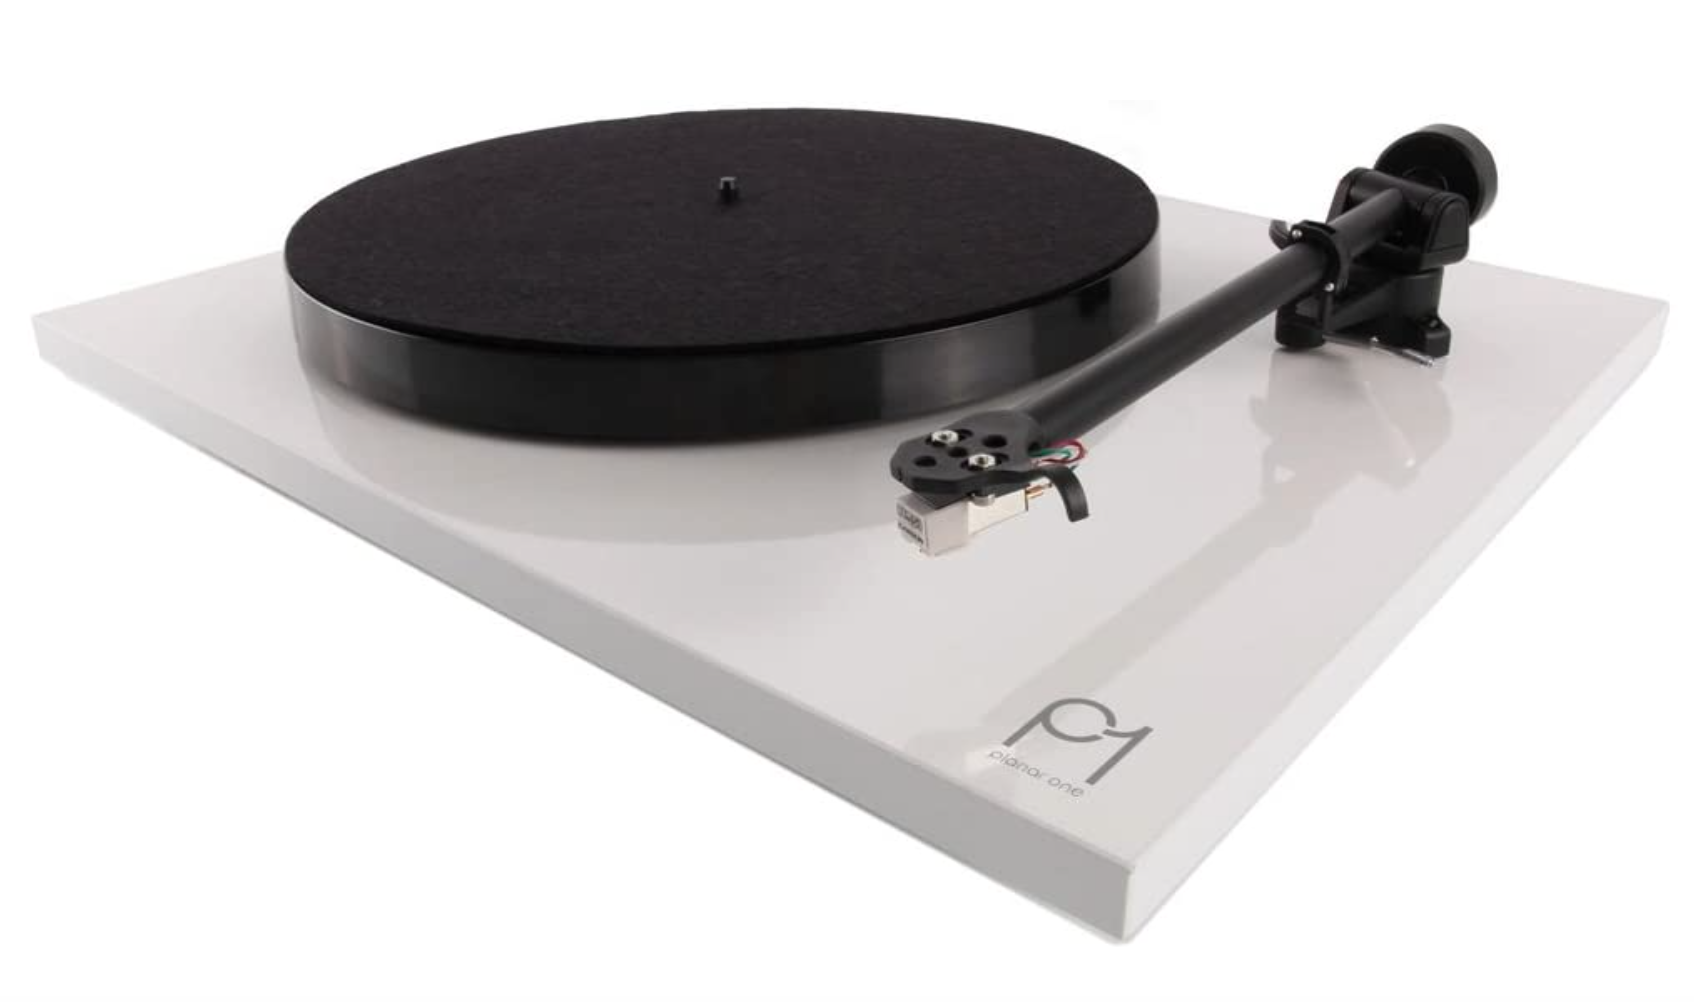 A Rega P1 Turntable Image from Our Best Record Players of 2022